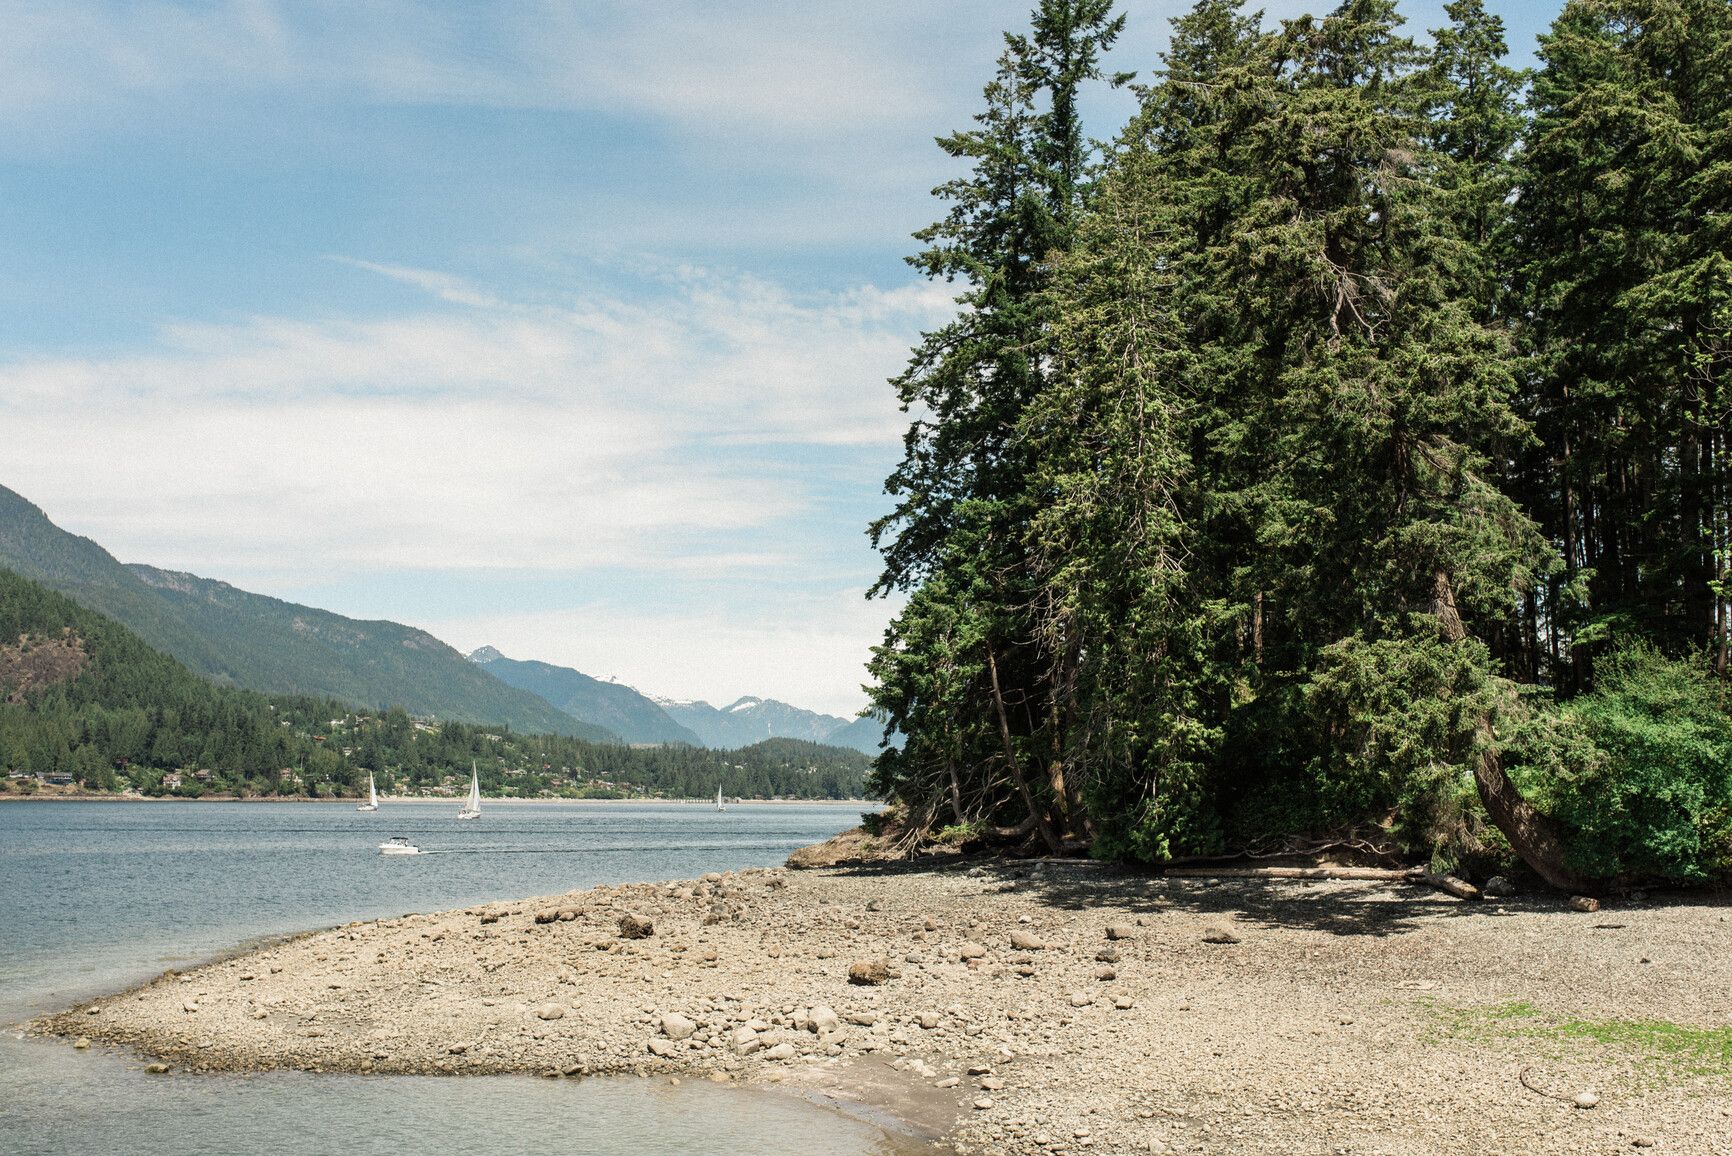 Beach at Plumper Cove Marine Park with views across Howe Sound.